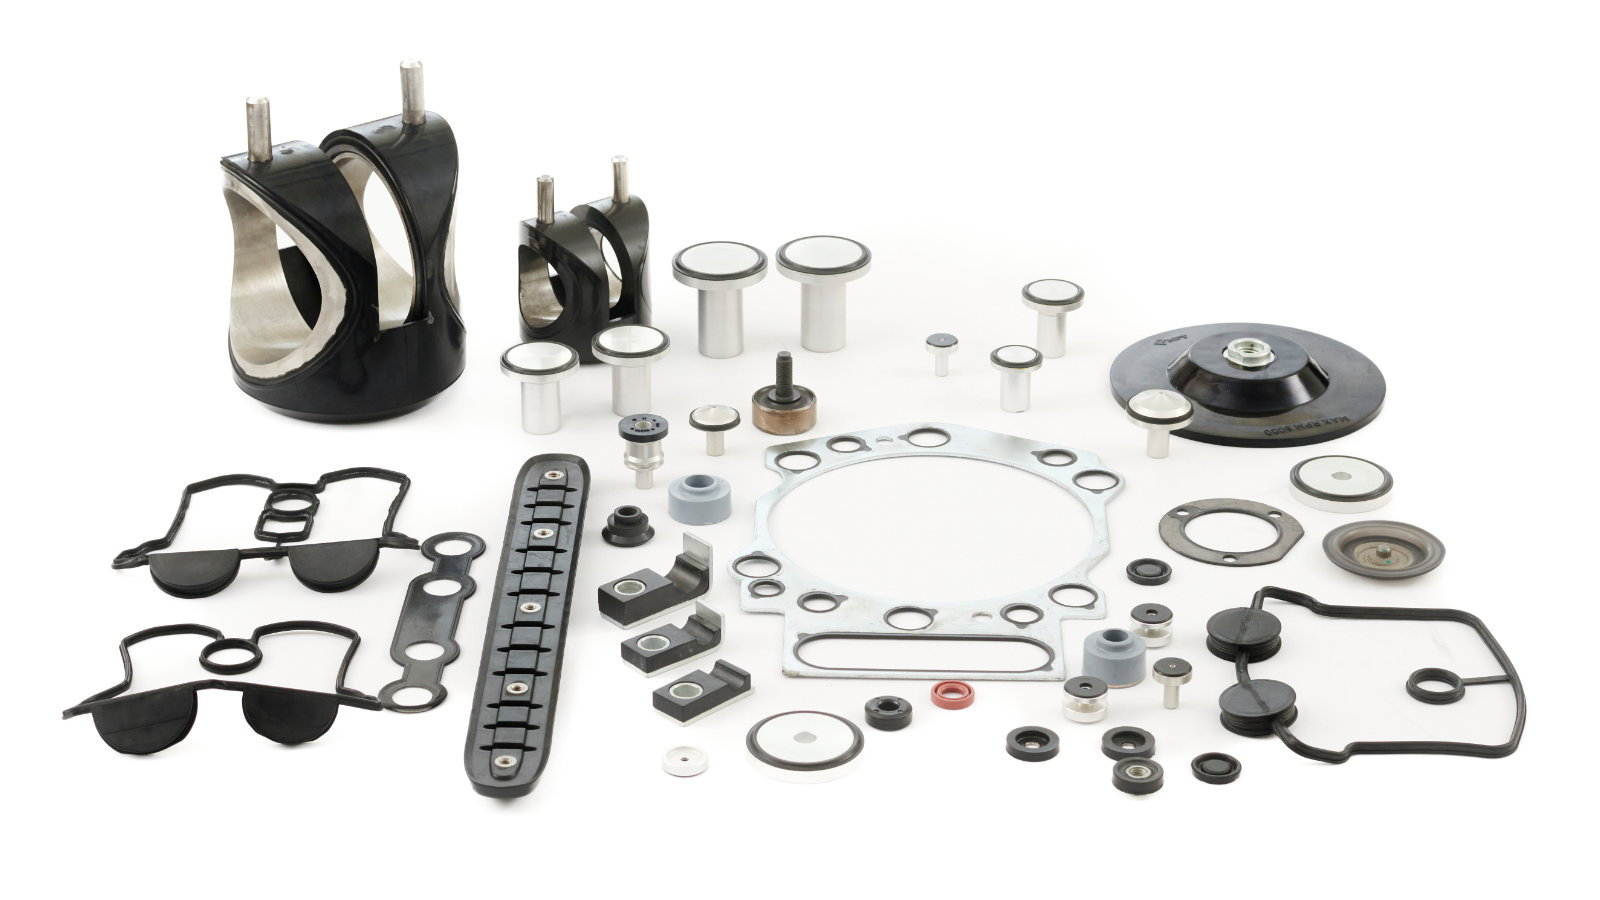 Metal-to-Rubber Bonded Parts